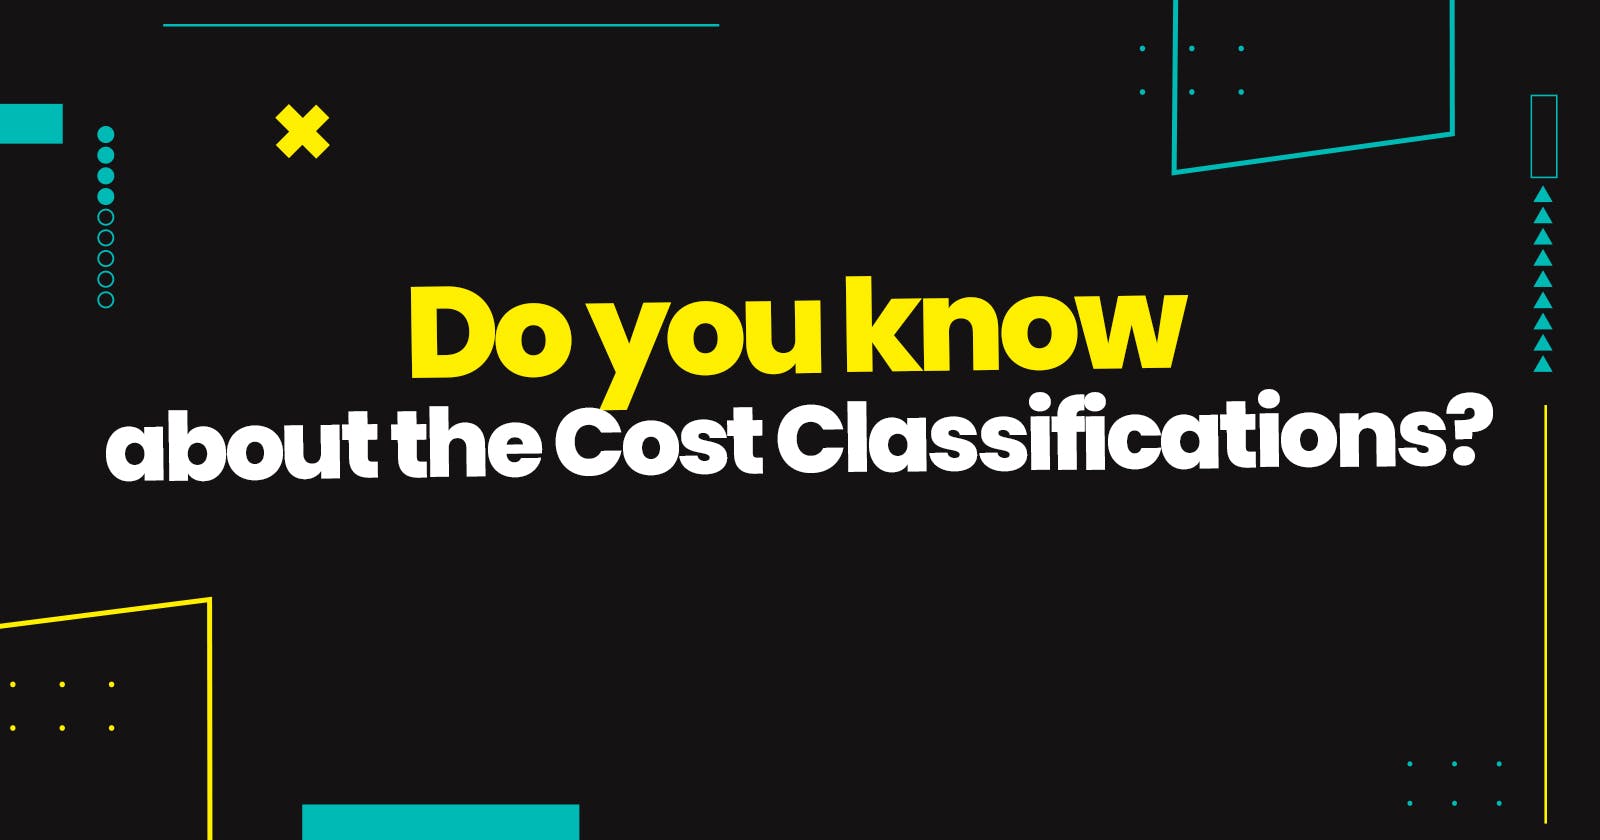 Do you know about the Cost Classifications?